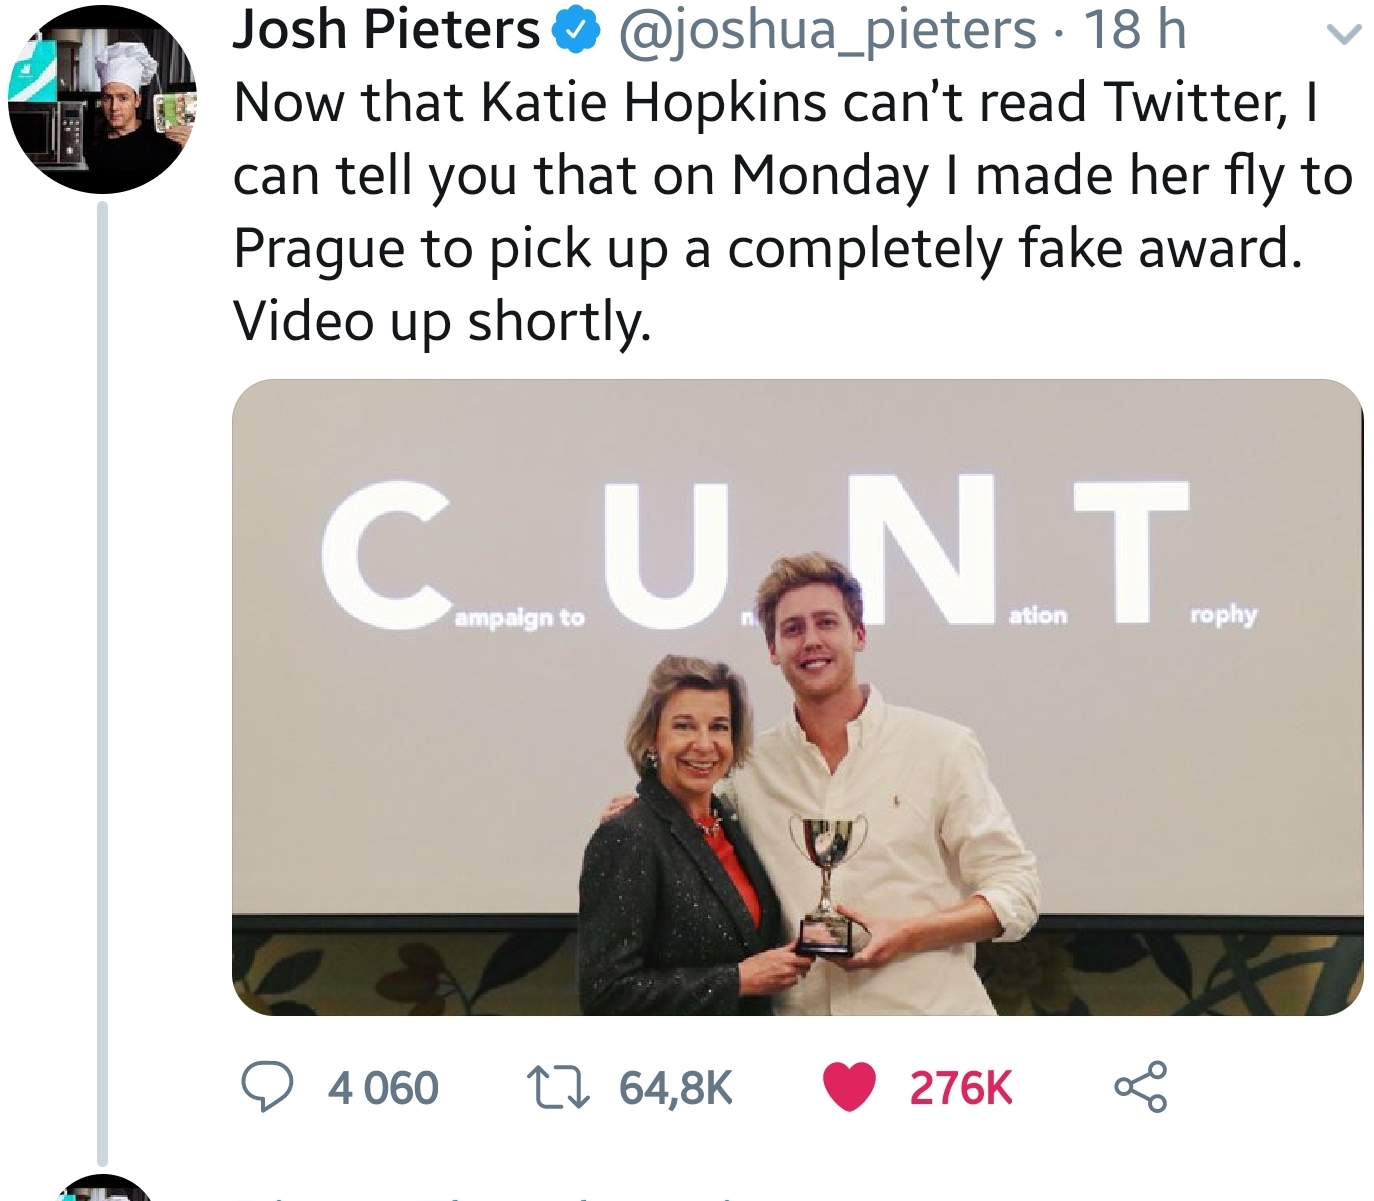 conversation - Josh Pieters 18 h Now that Katie Hopkins can't read Twitter, can tell you that on Monday I made her fly to Prague to pick up a completely fake award. Video up shortly. ampaign to ation rophy 9 4060 22